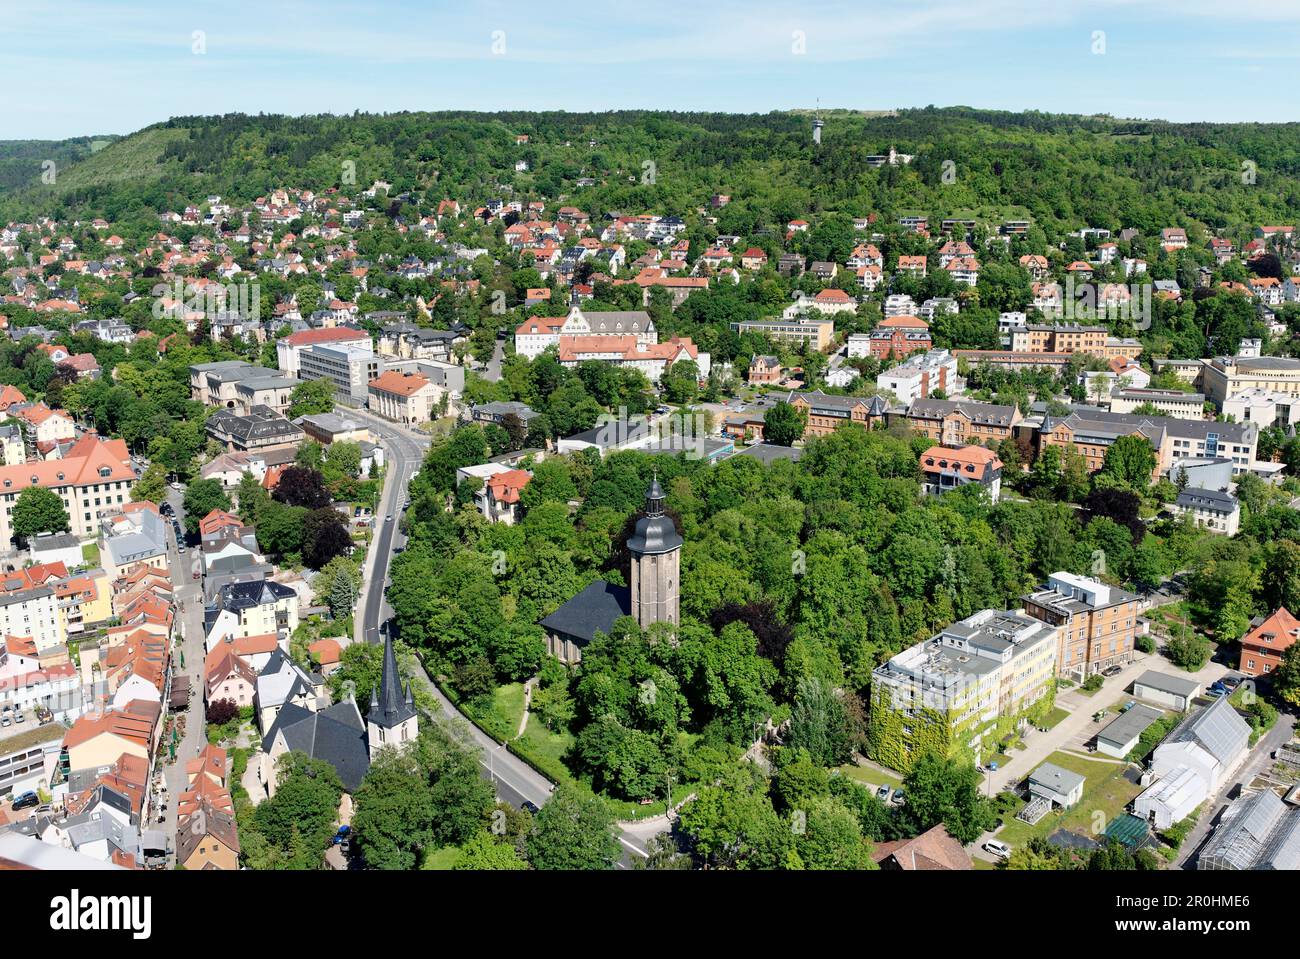 View from Jentower, Johannes Church and Friedenskirche, Jena, Thuringia, Germany Stock Photo